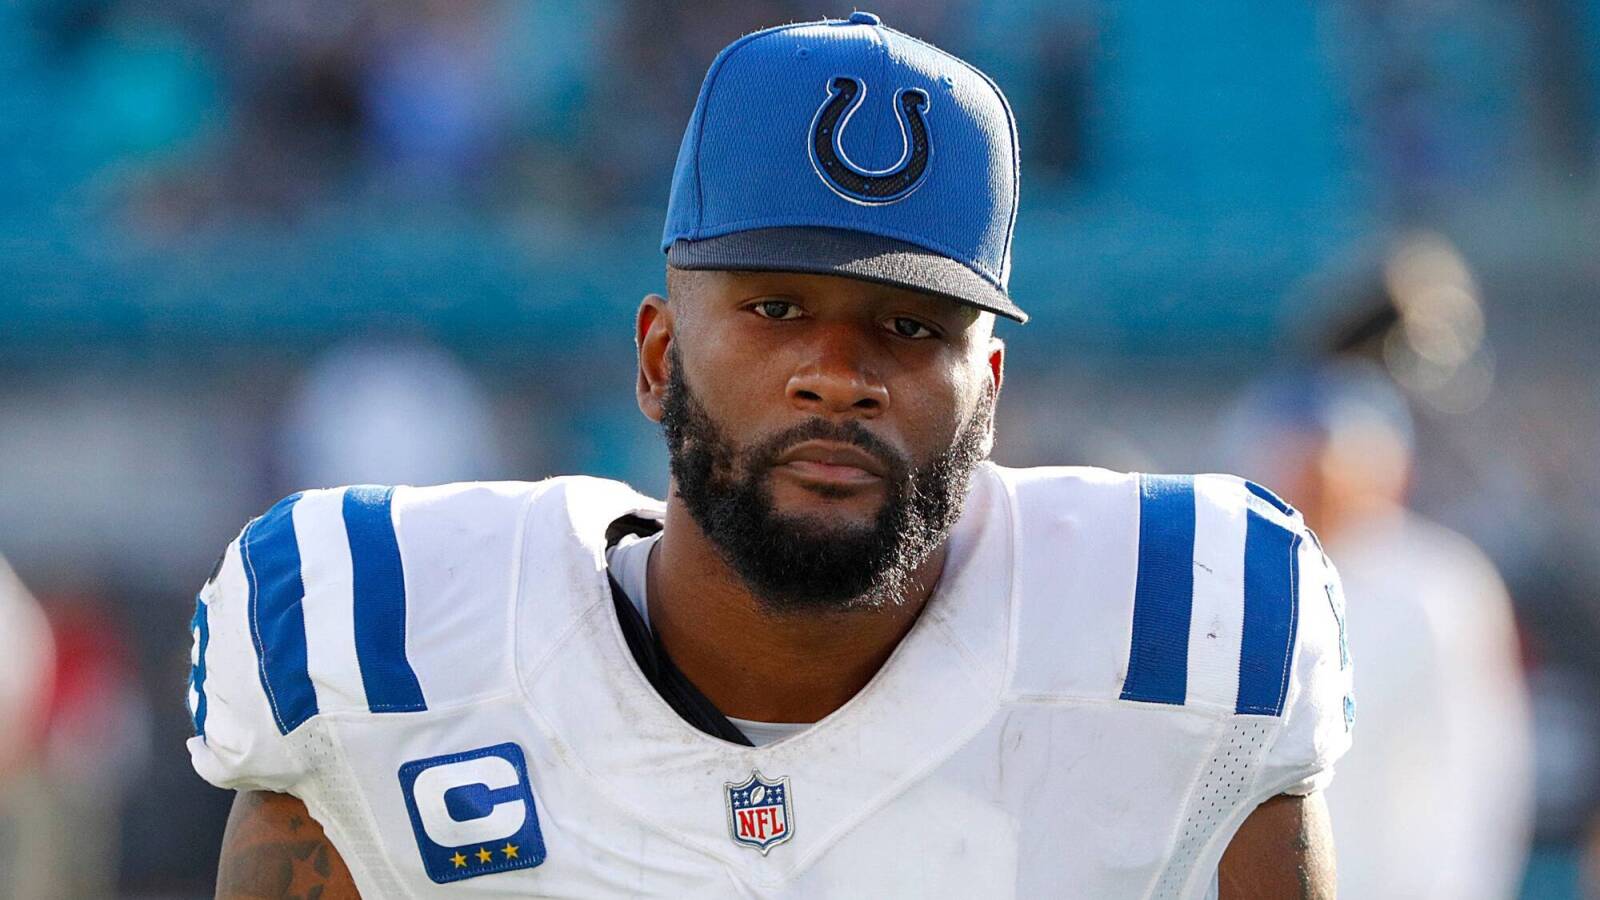 Colts star LB Shaquille Leonard gained’t play Week 1